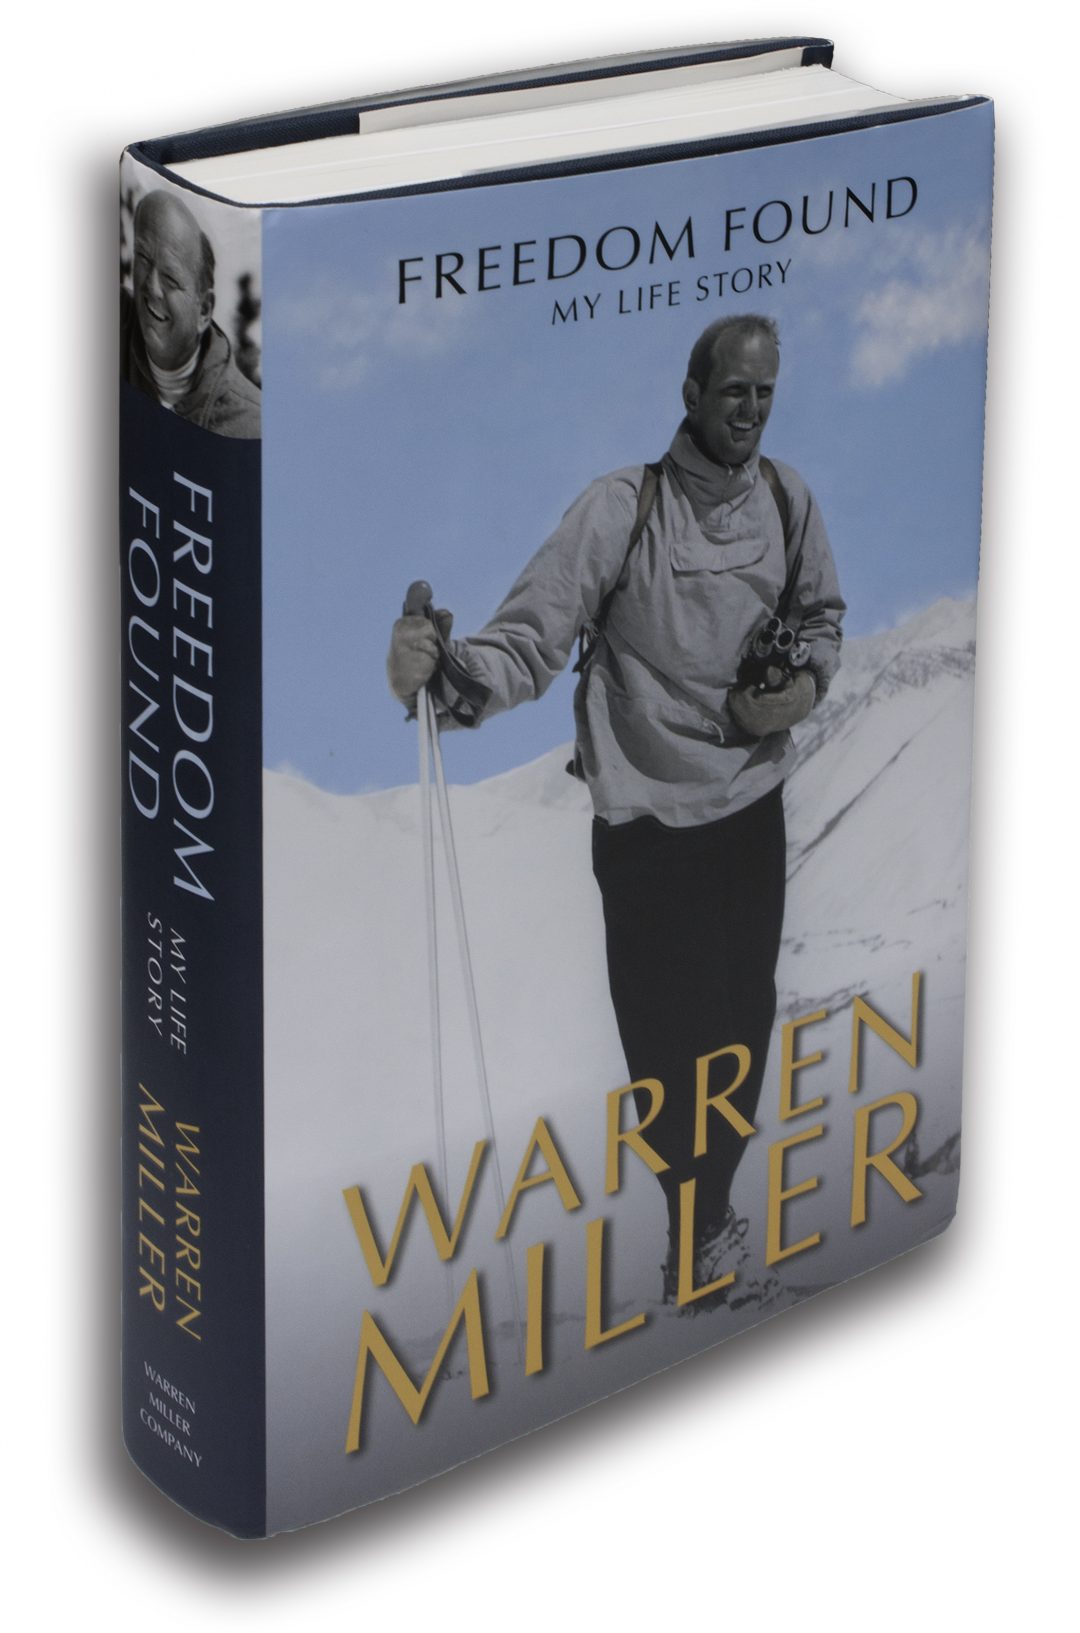 Order Freedom Found by Warren Miller from Amazon, WME or at your bookstore.